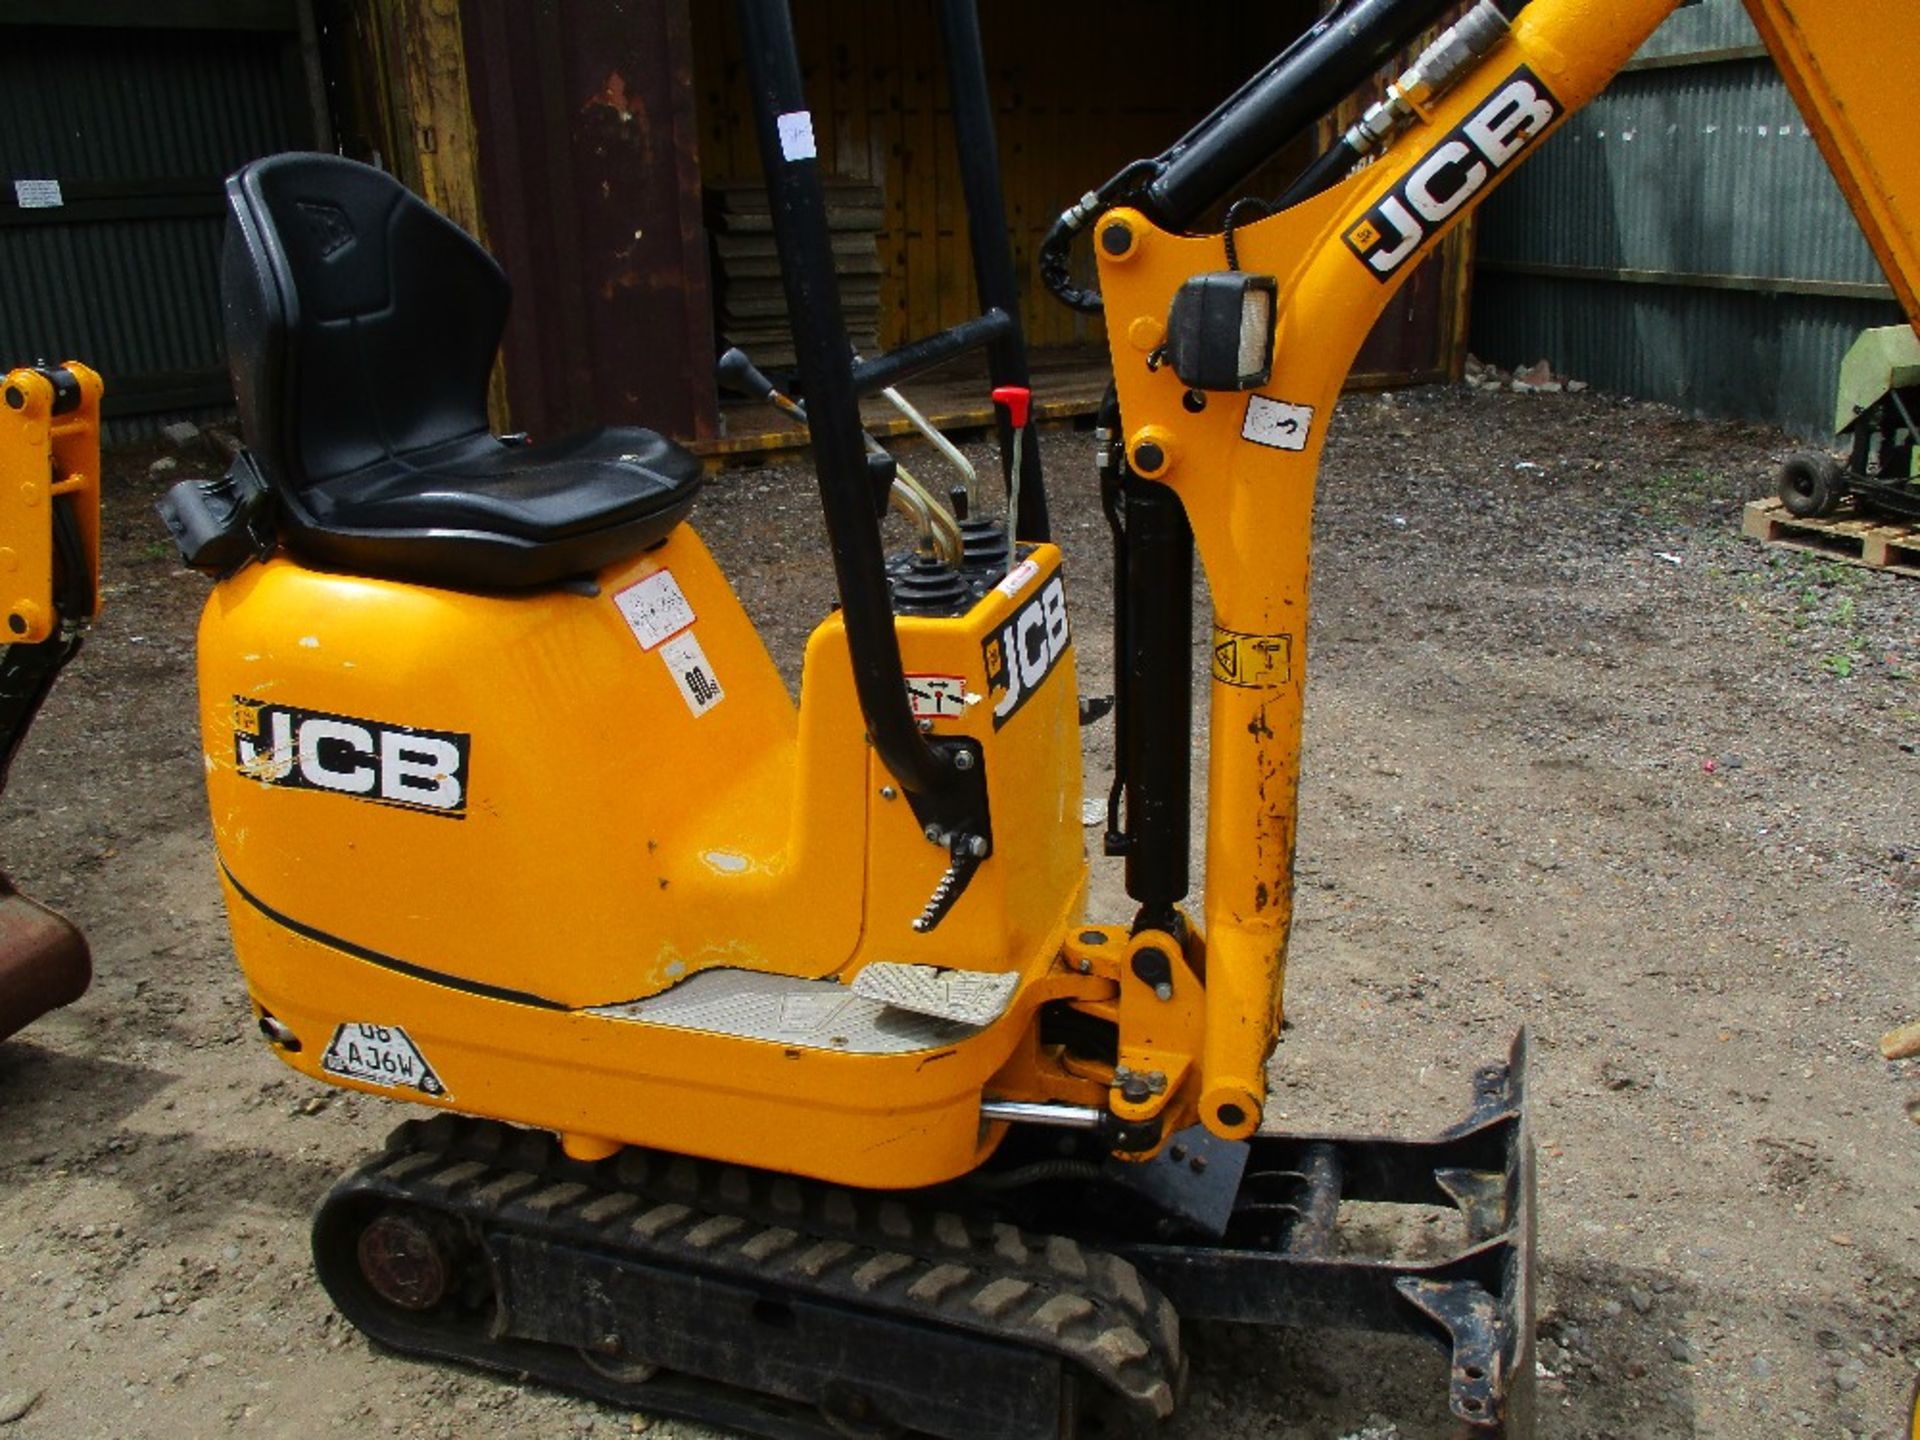 JCB 8008 CTS MICRO EXCAVATOR EXPANDING TRACKS 767REC HRS - Image 6 of 6